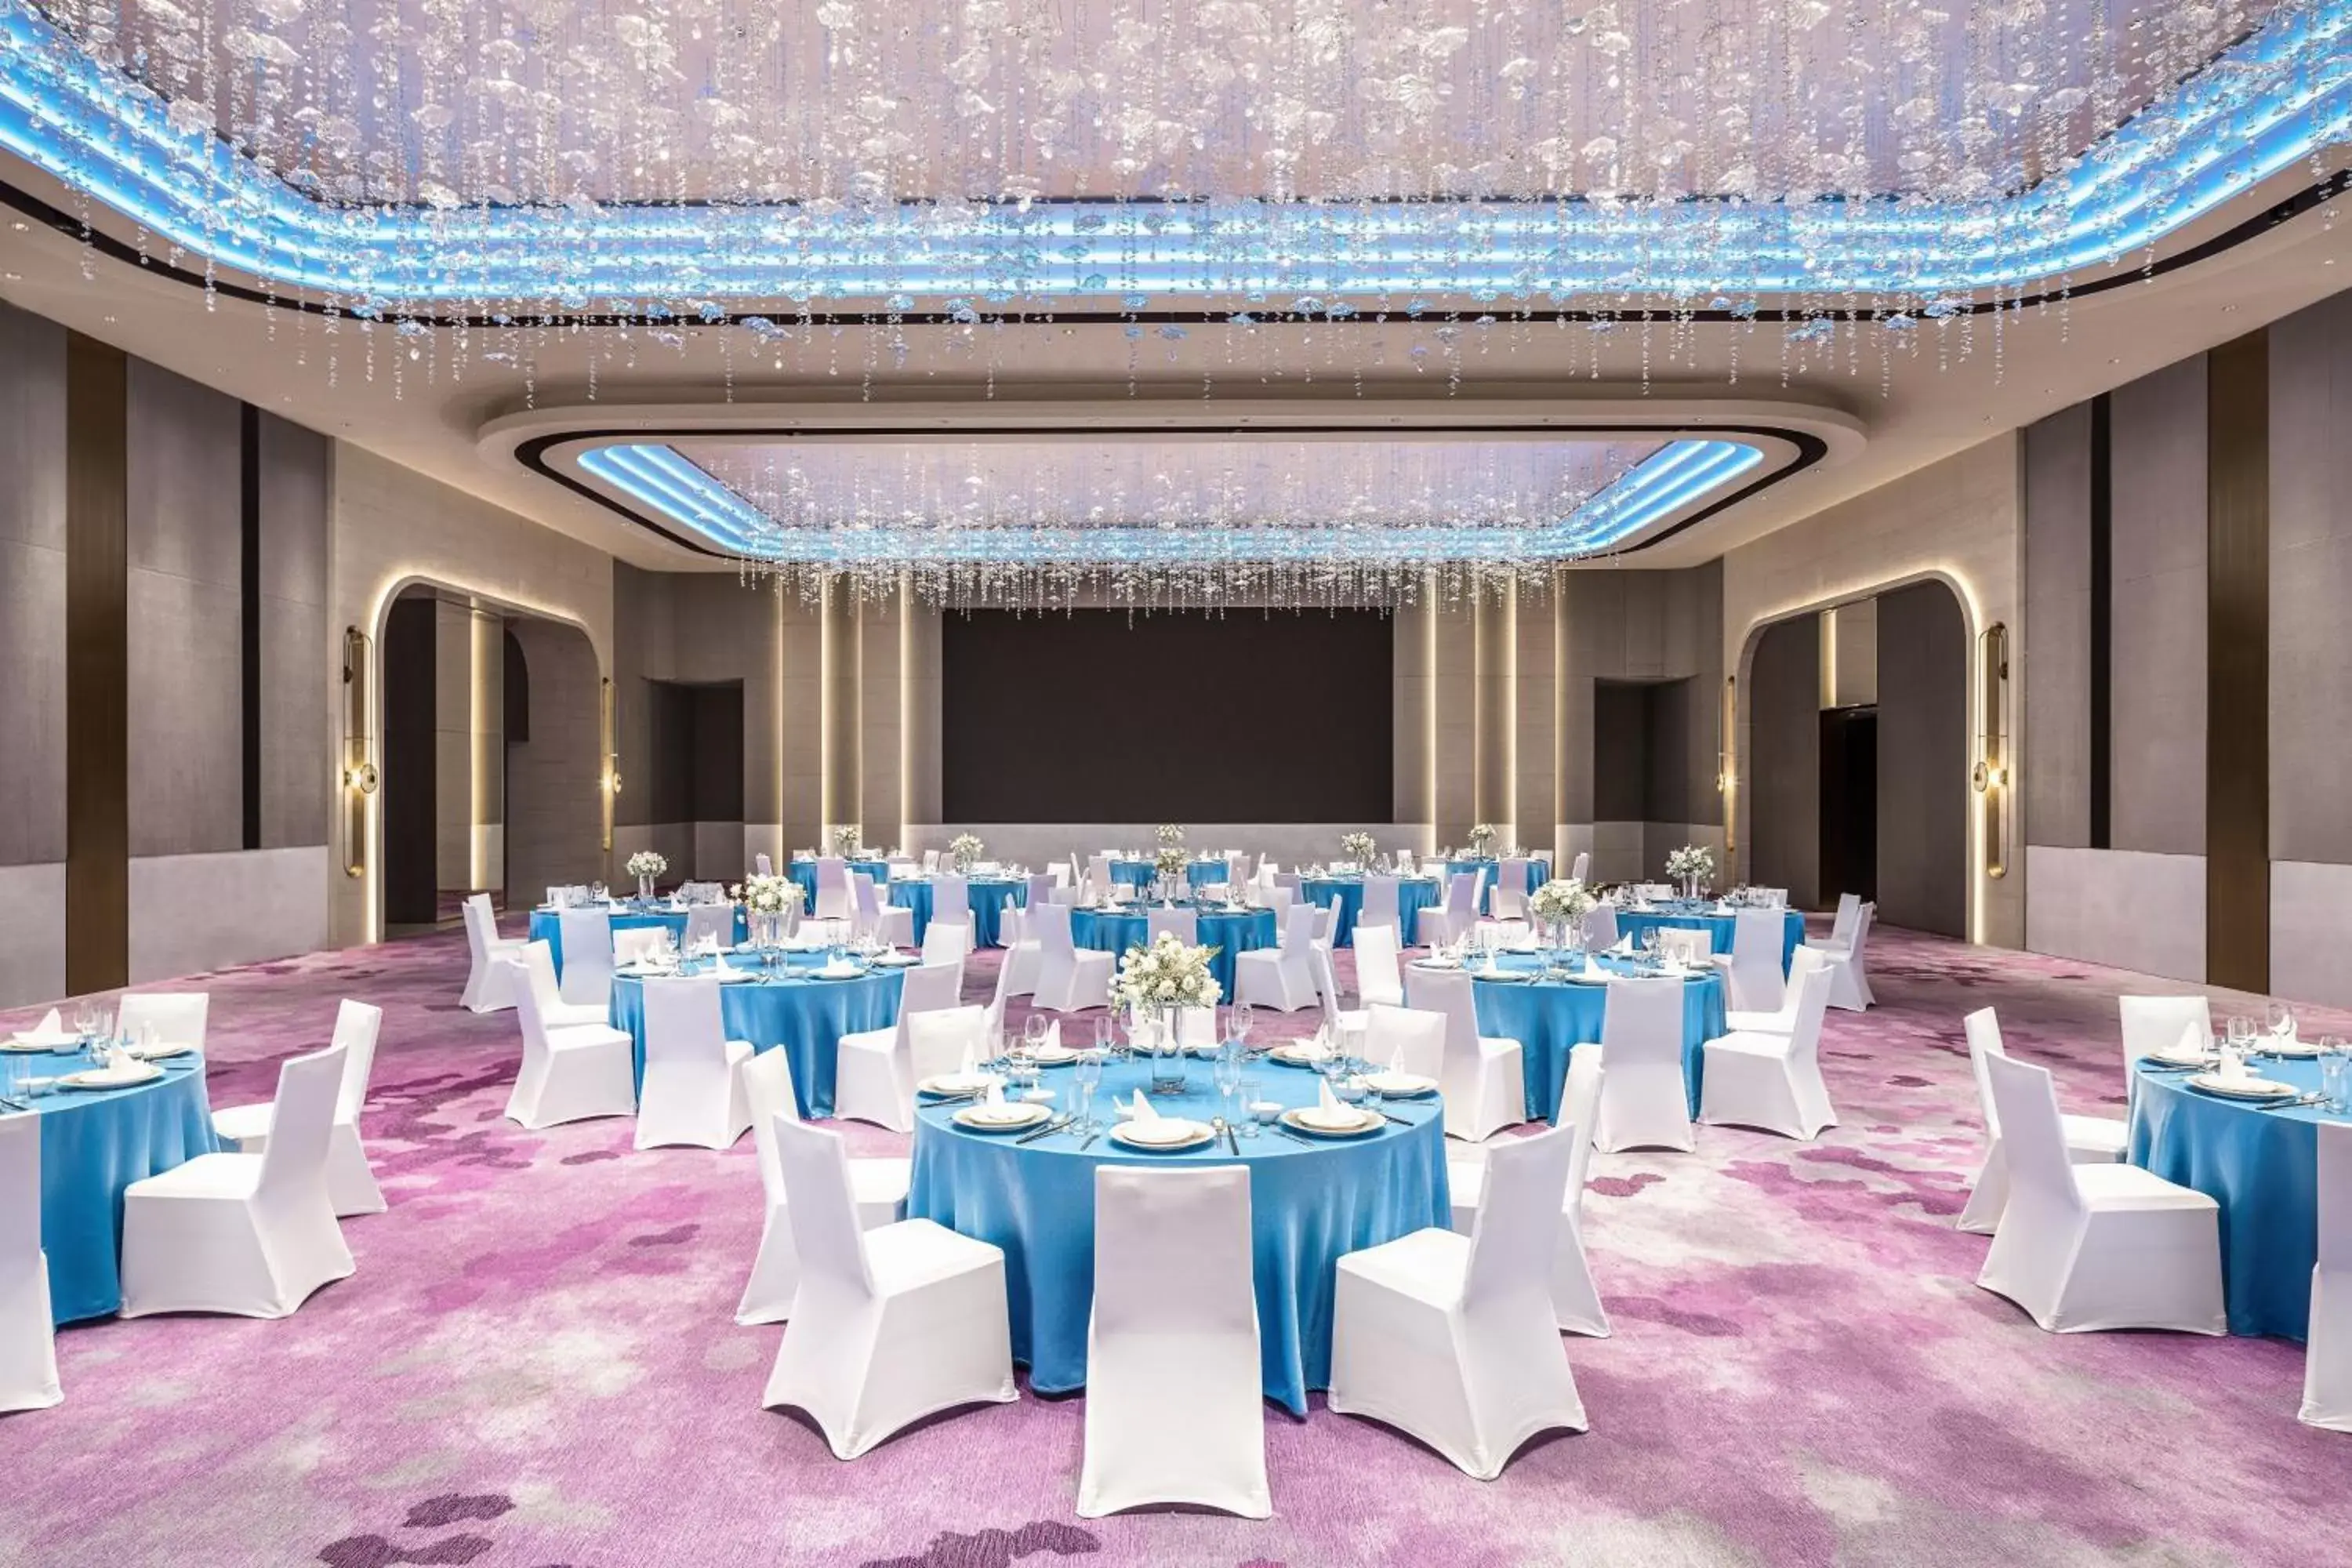 Meeting/conference room, Banquet Facilities in Renaissance Zhuhai Hotel